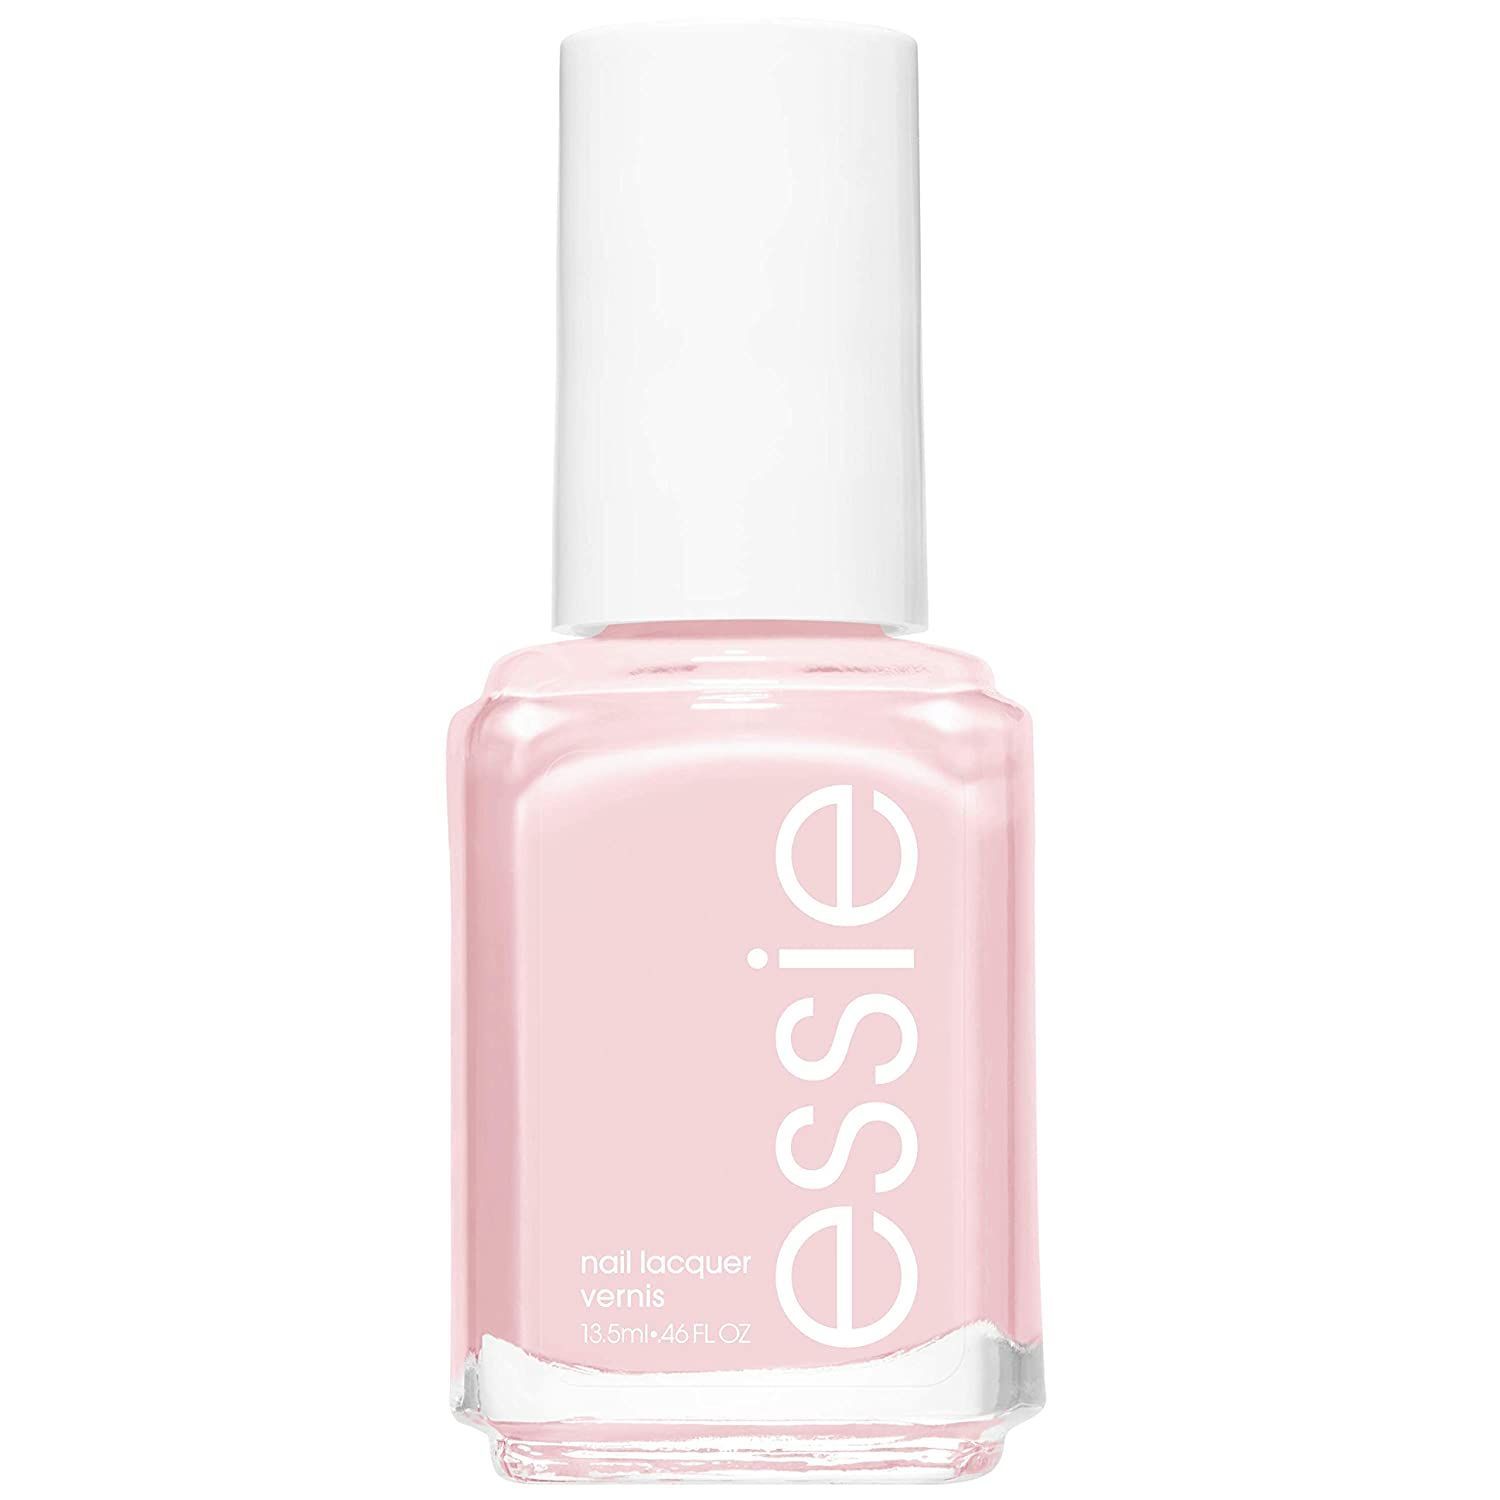 Nail Lacquer in Mademoiselle